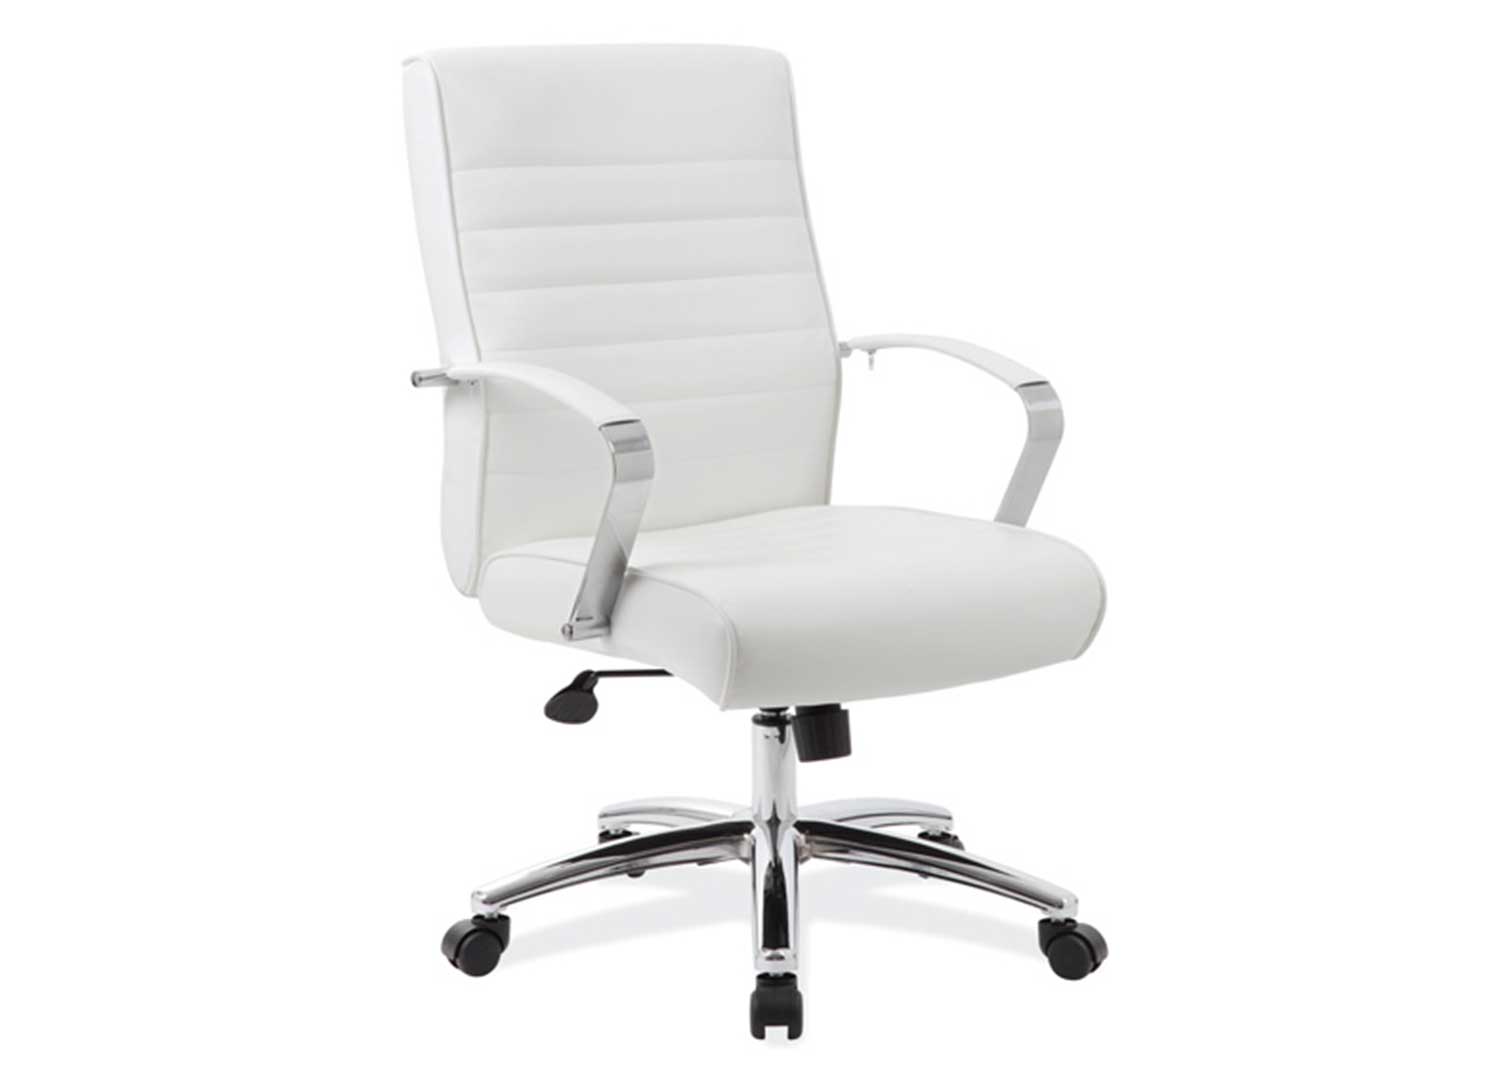 Shire Task Chair